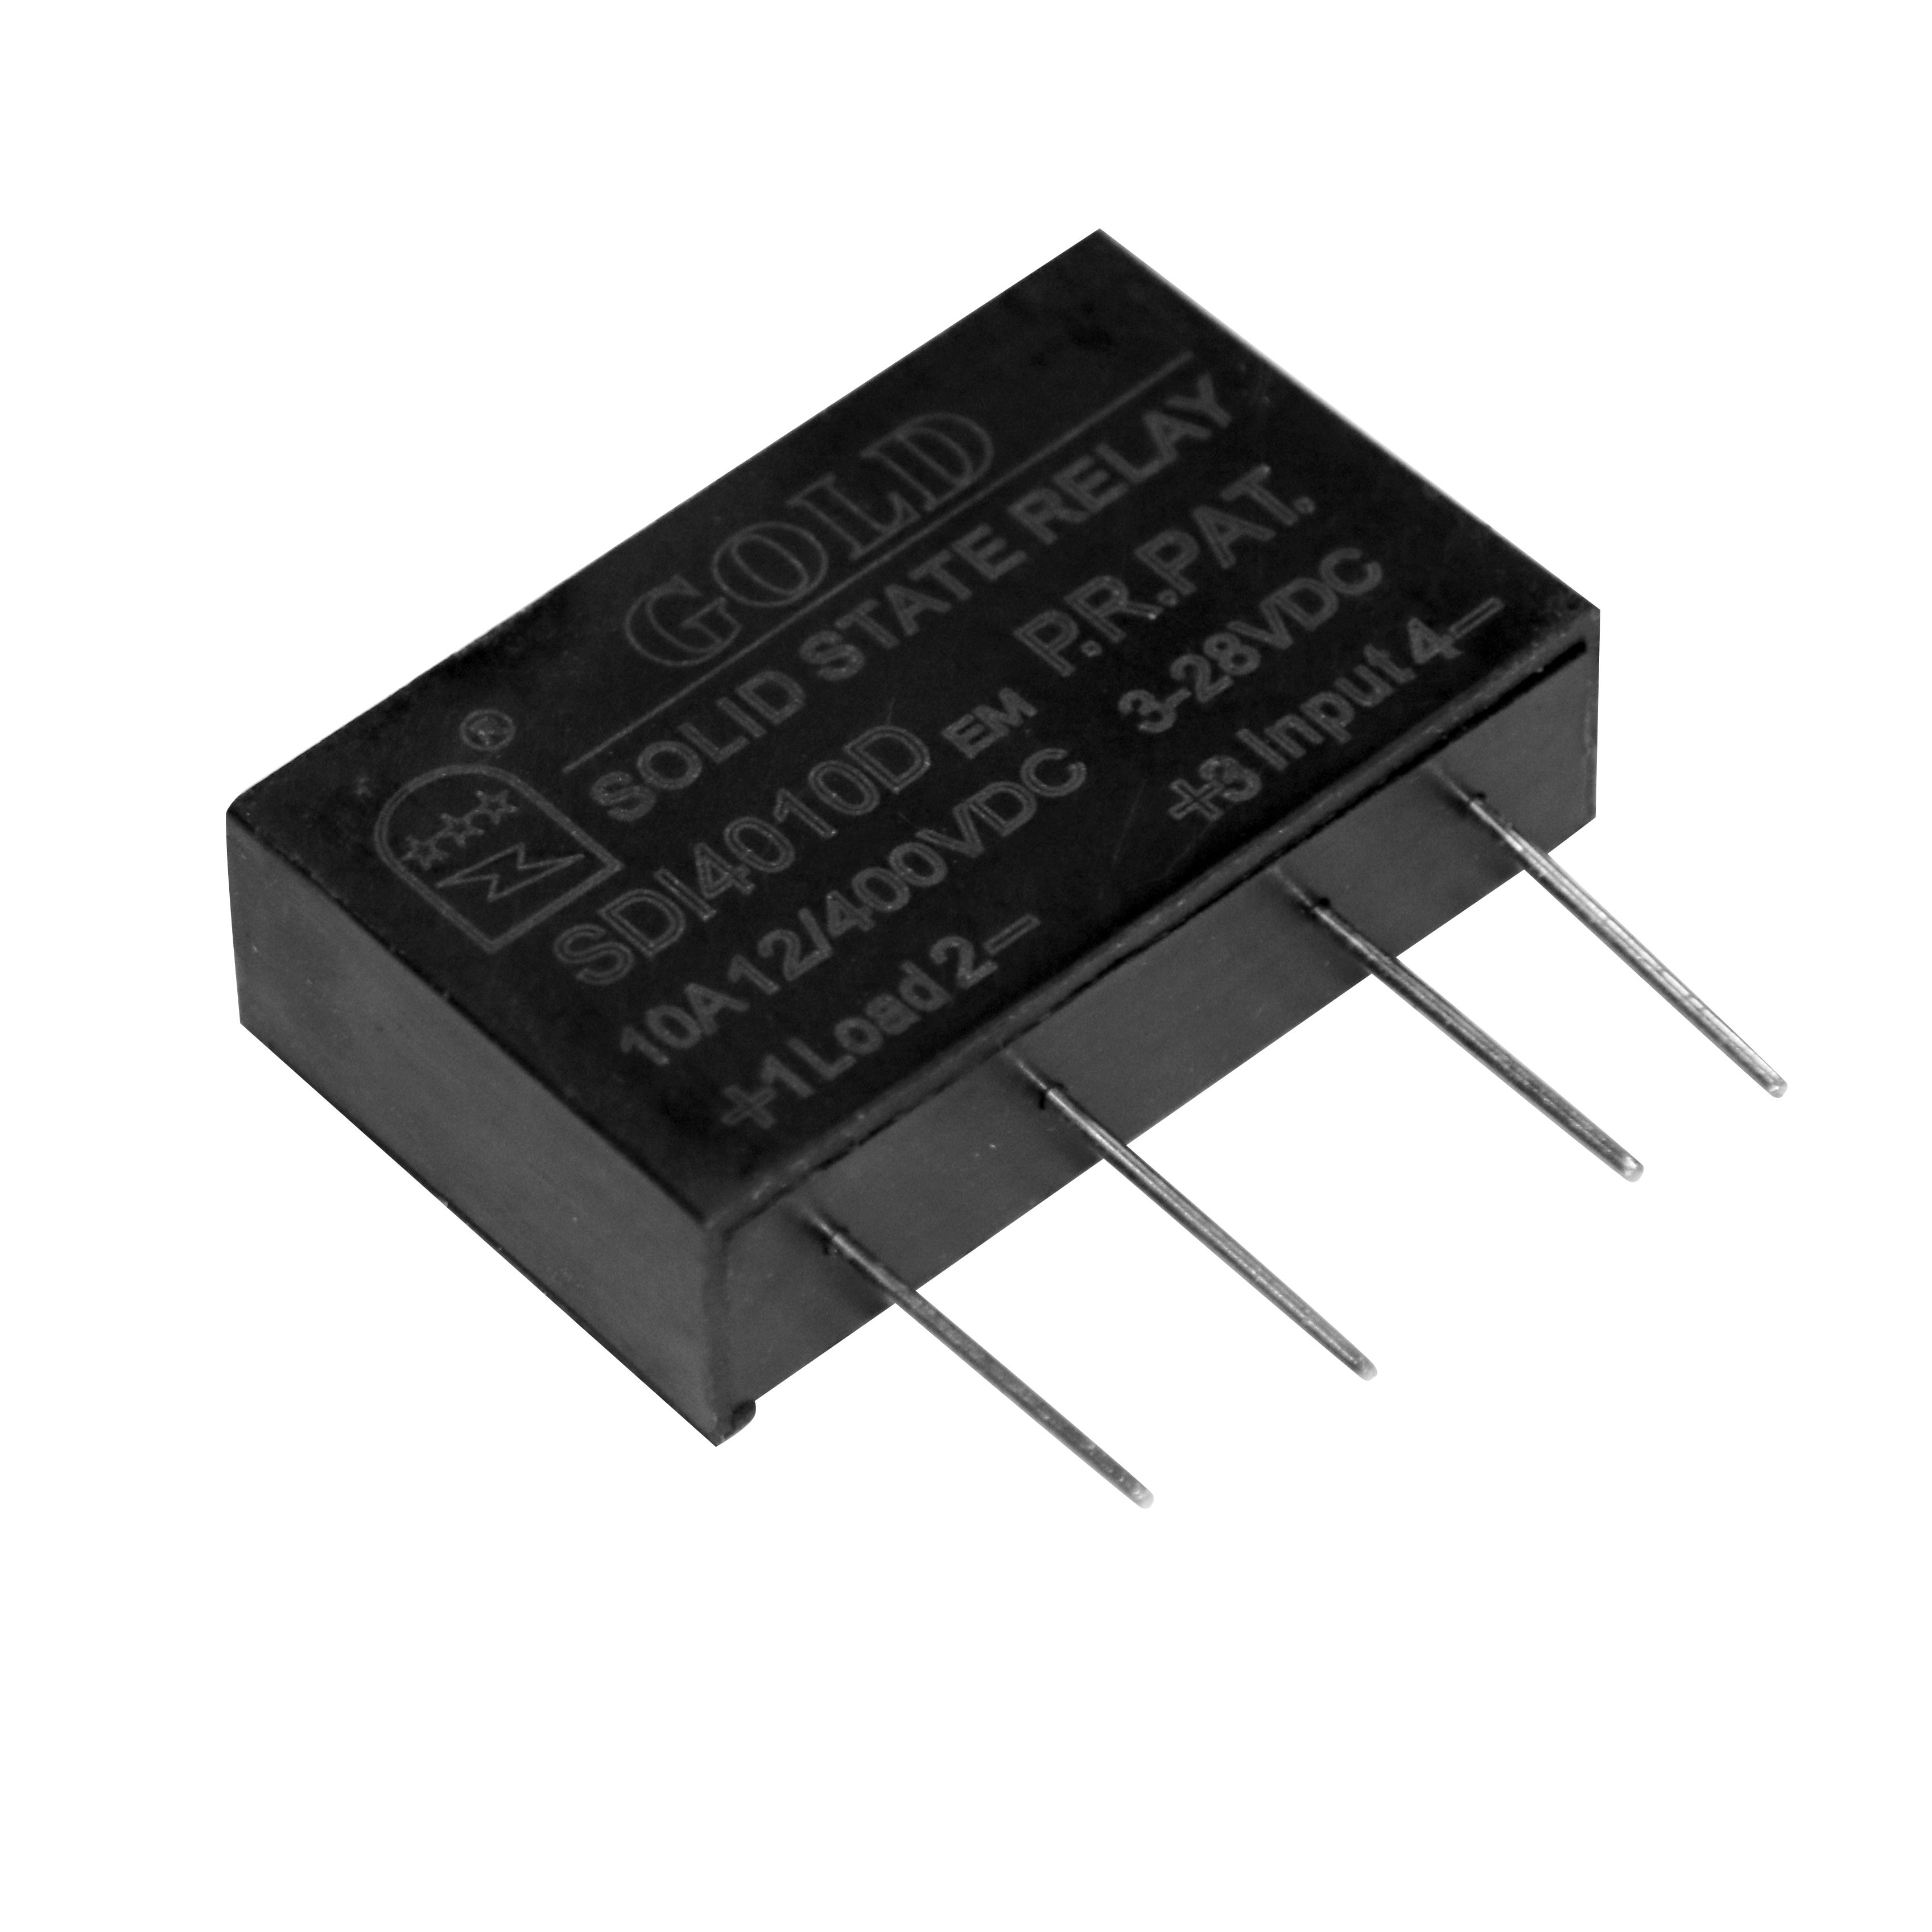 Buy cheap Solid State Relay 12v 100a product